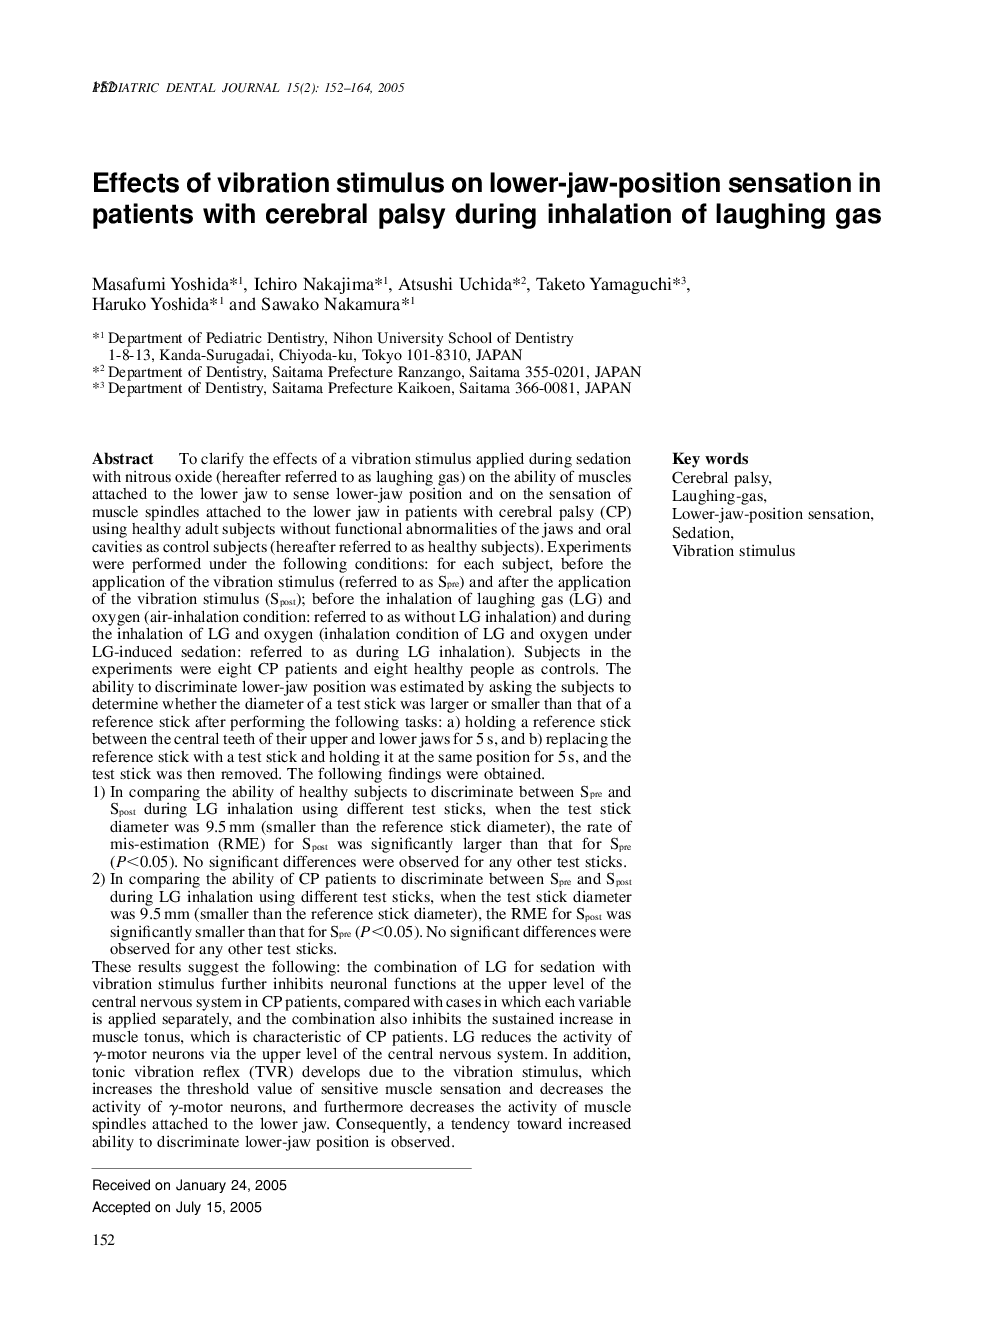 Effects of vibration stimulus on lower-jaw-position sensation in patients with cerebral palsy during inhalation of laughing gas